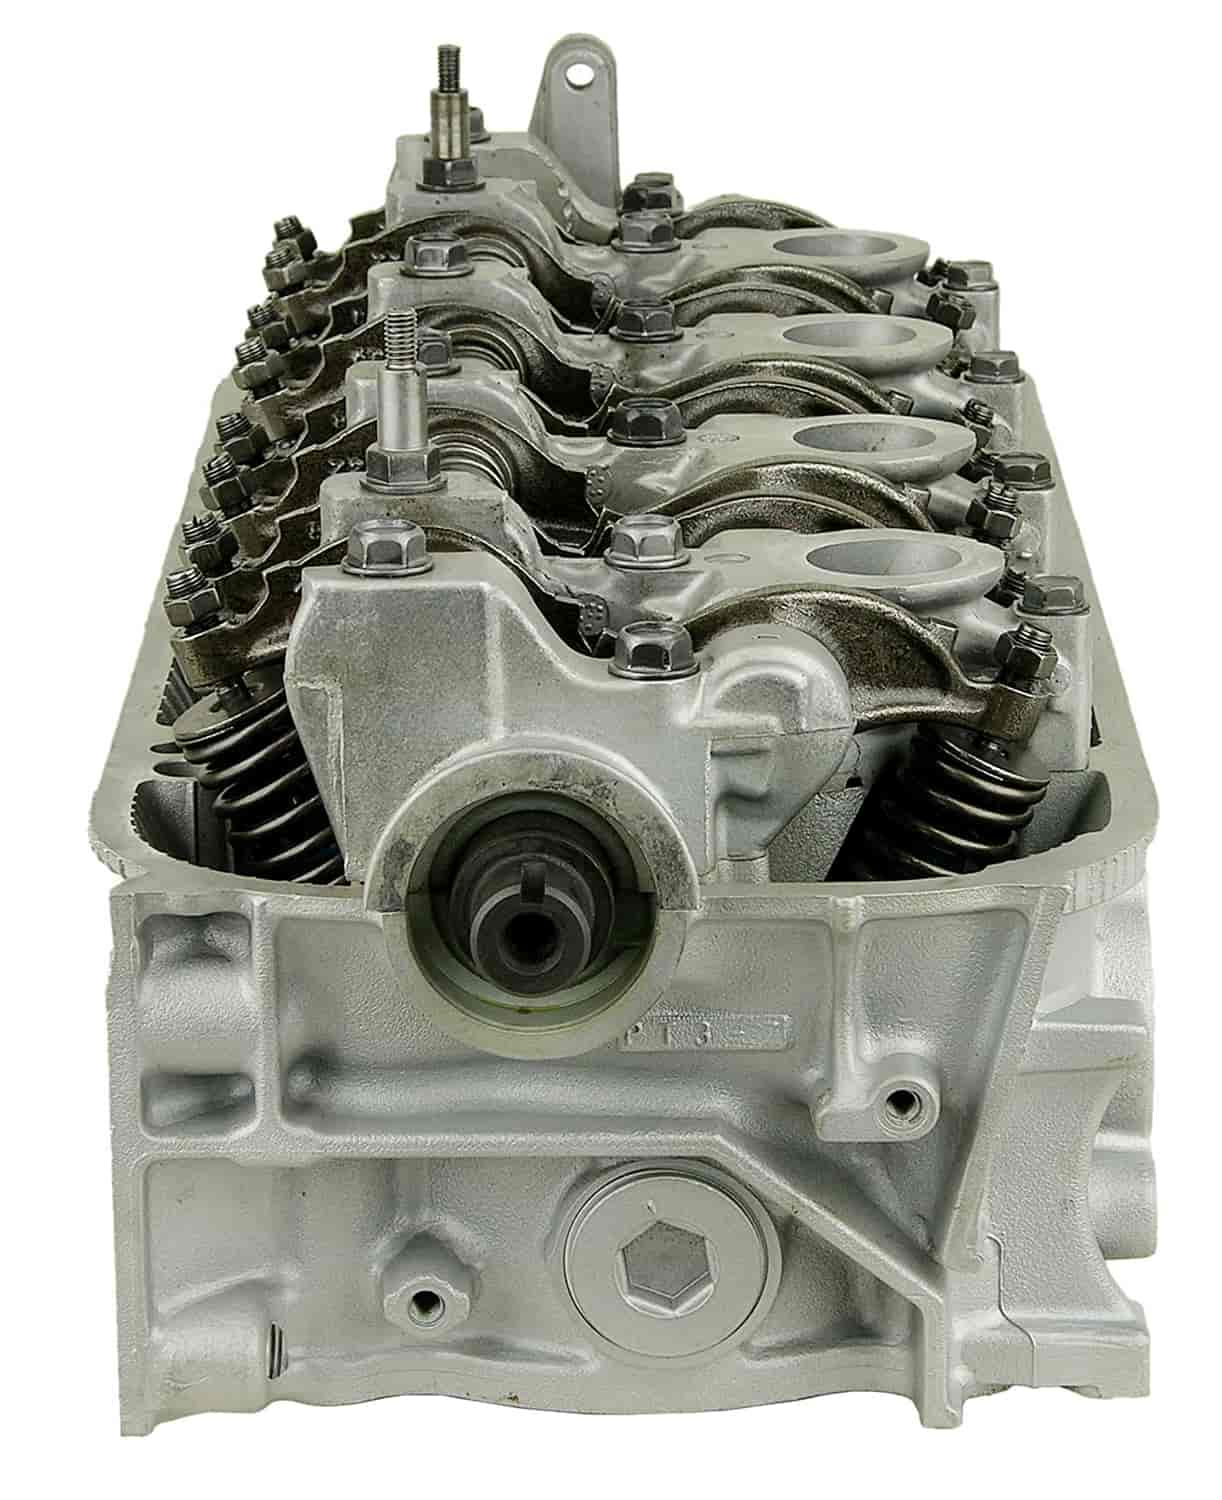 Remanufactured Cylinder Head for 1990-1991 Honda Accord with 2.2L L4 F22A